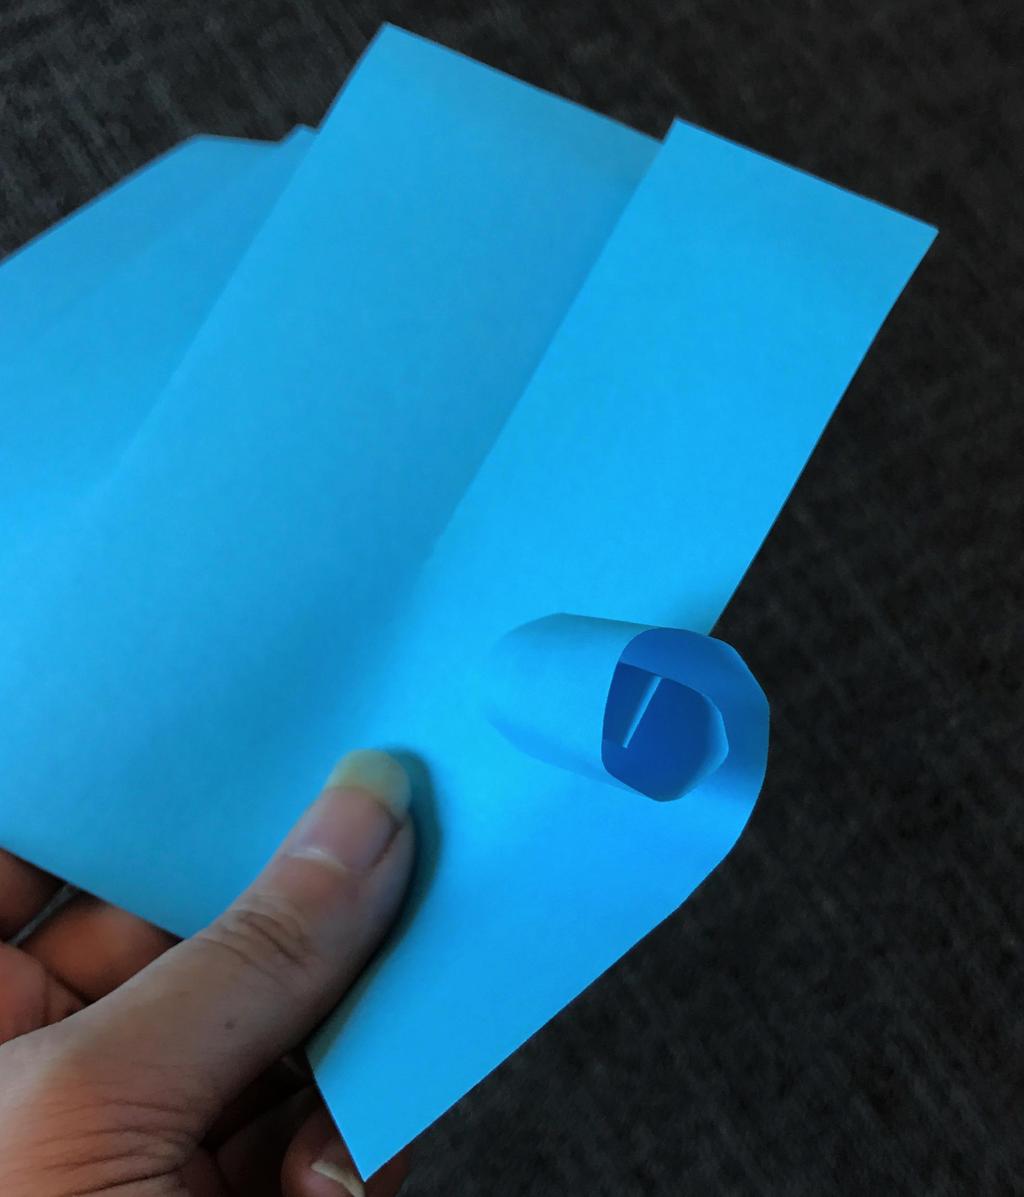 Roll each section up, then let it go Glue the edges of the blue paper on the edges